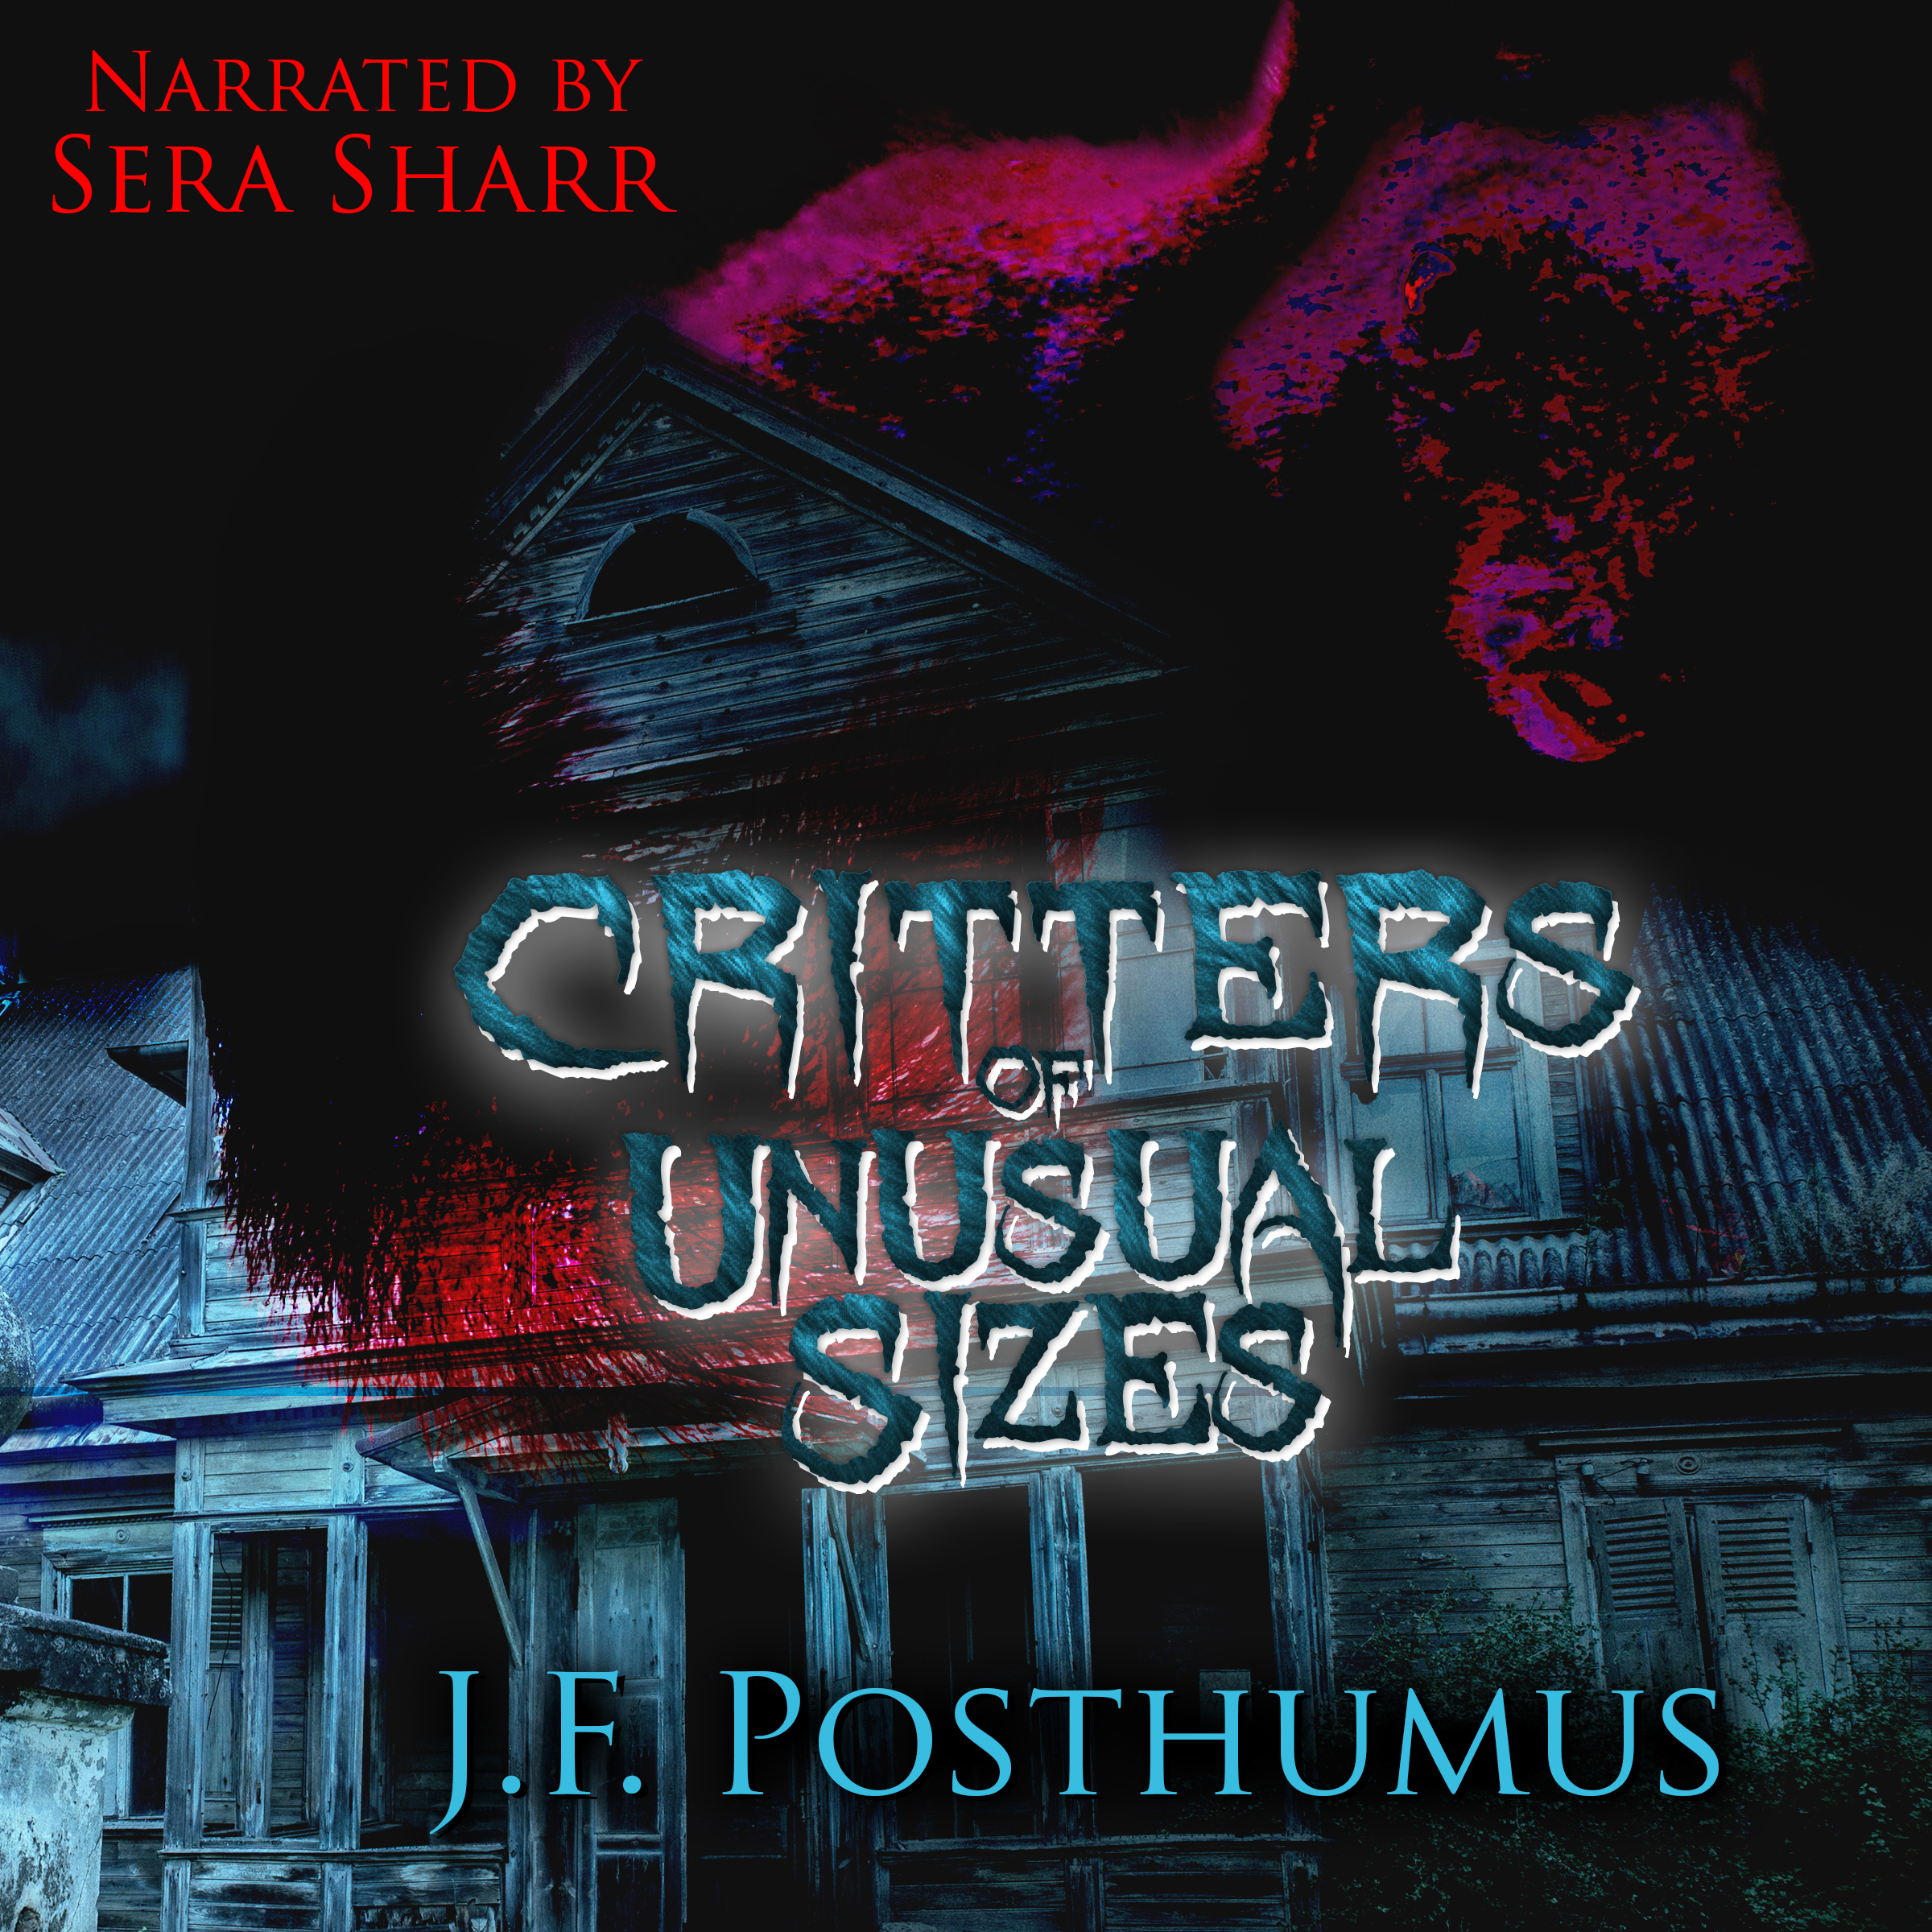 C.O.U.S. / Critters of Unusual Size is now available on Audible!